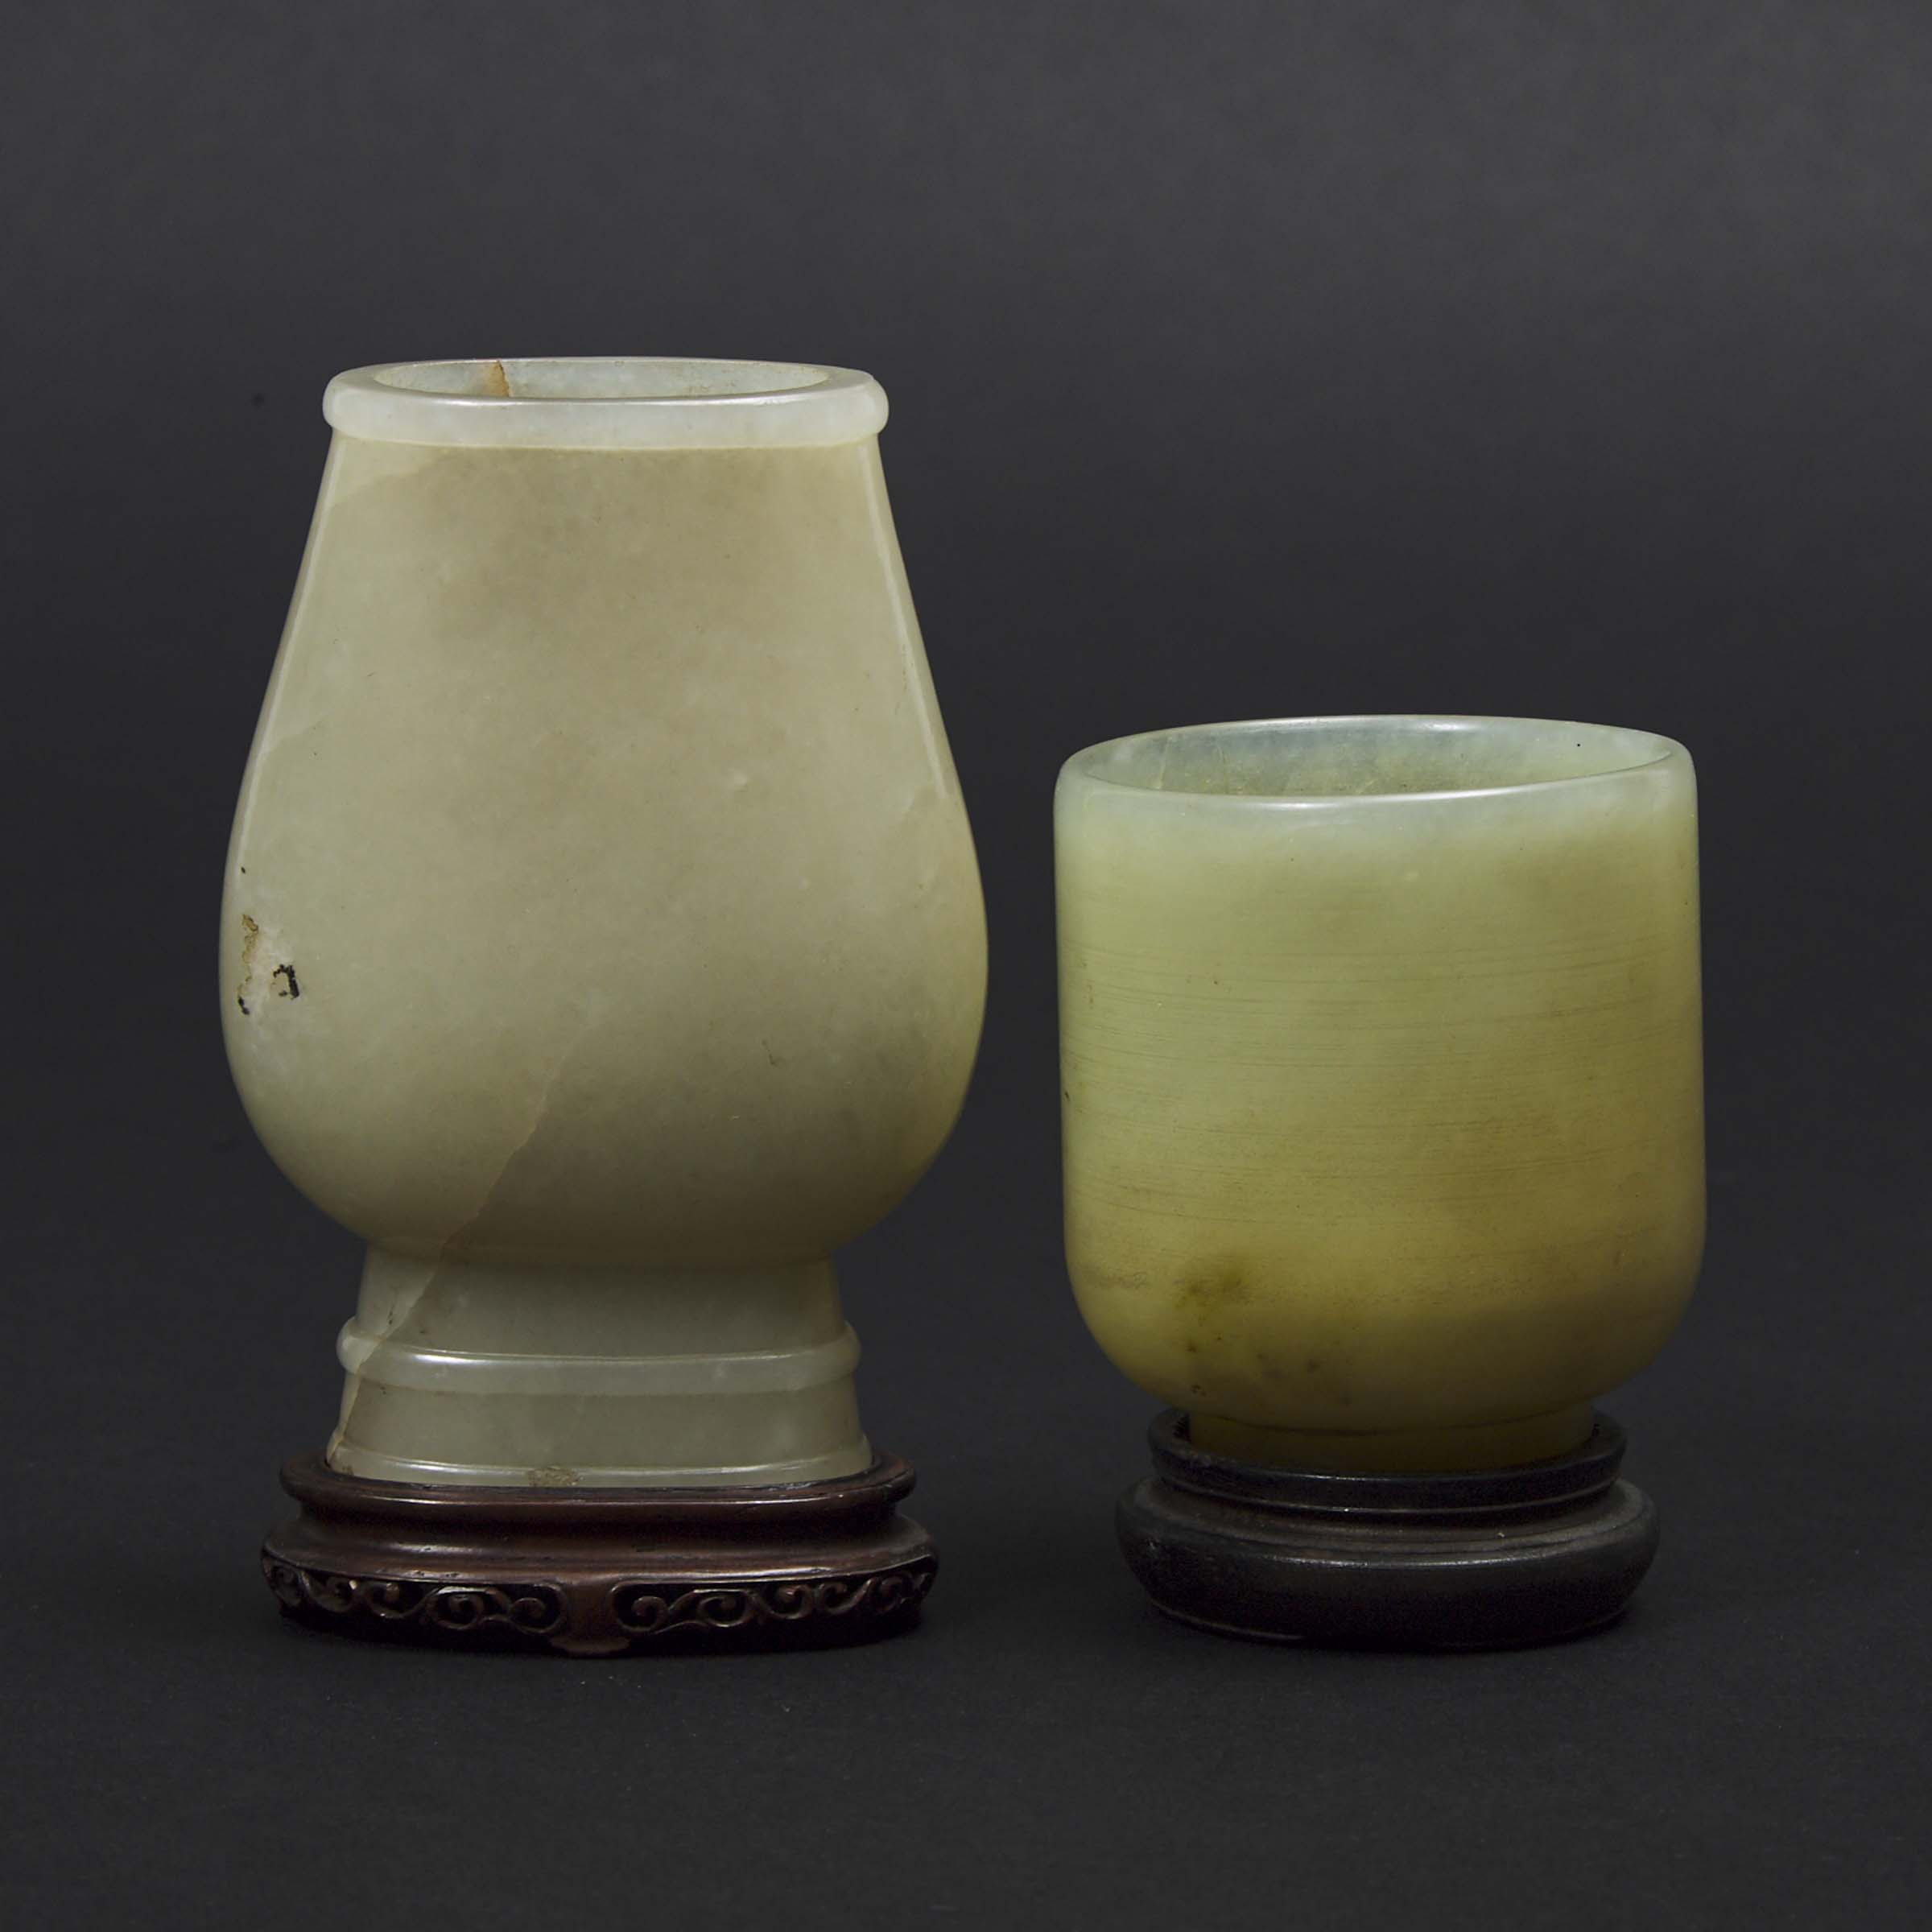 A White Jade Vase, together with a Pale Celadon Jade Cup, 19th/20th Century